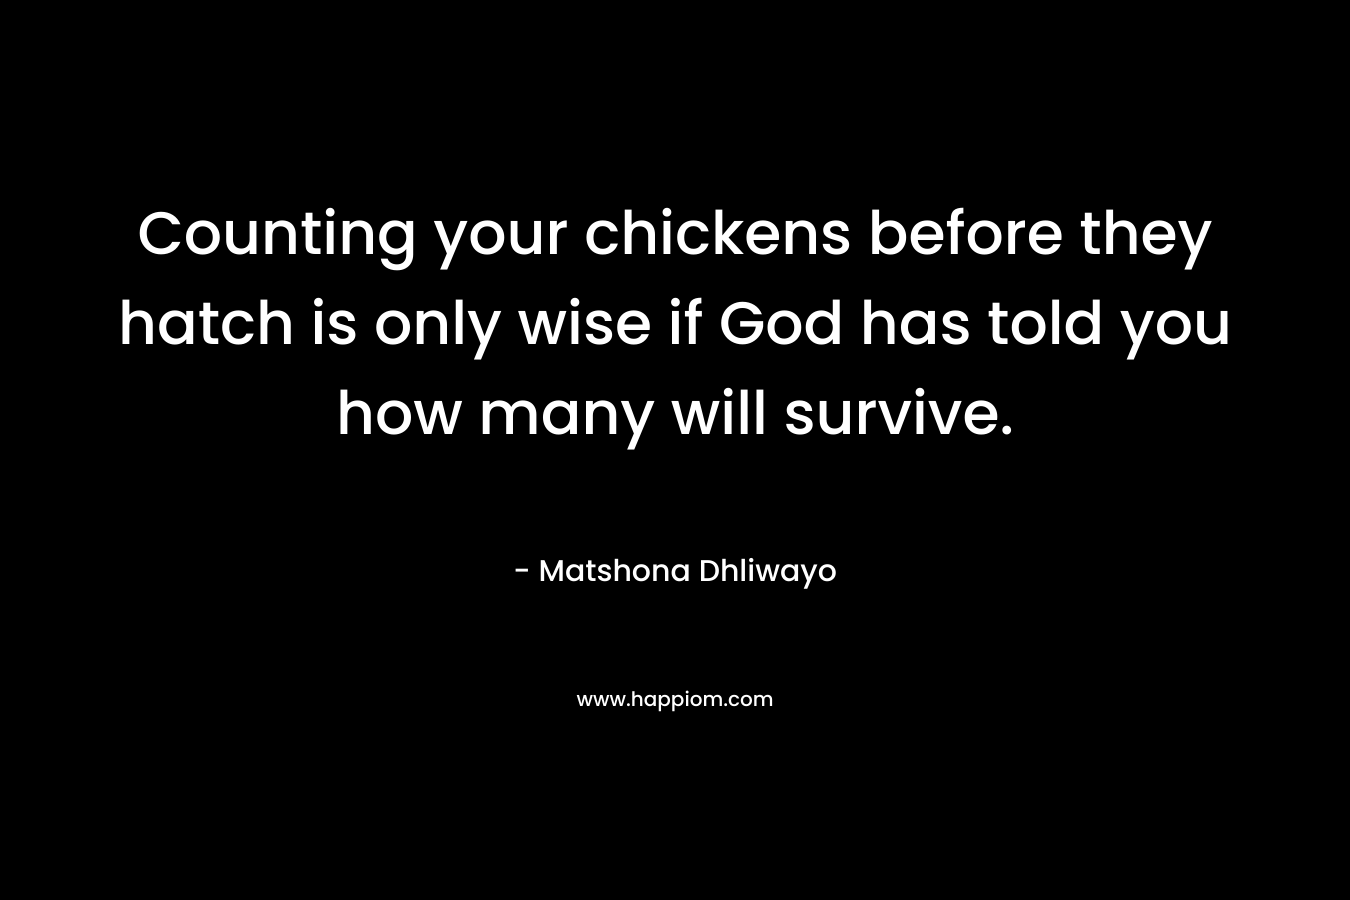 Counting your chickens before they hatch is only wise if God has told you how many will survive. – Matshona Dhliwayo